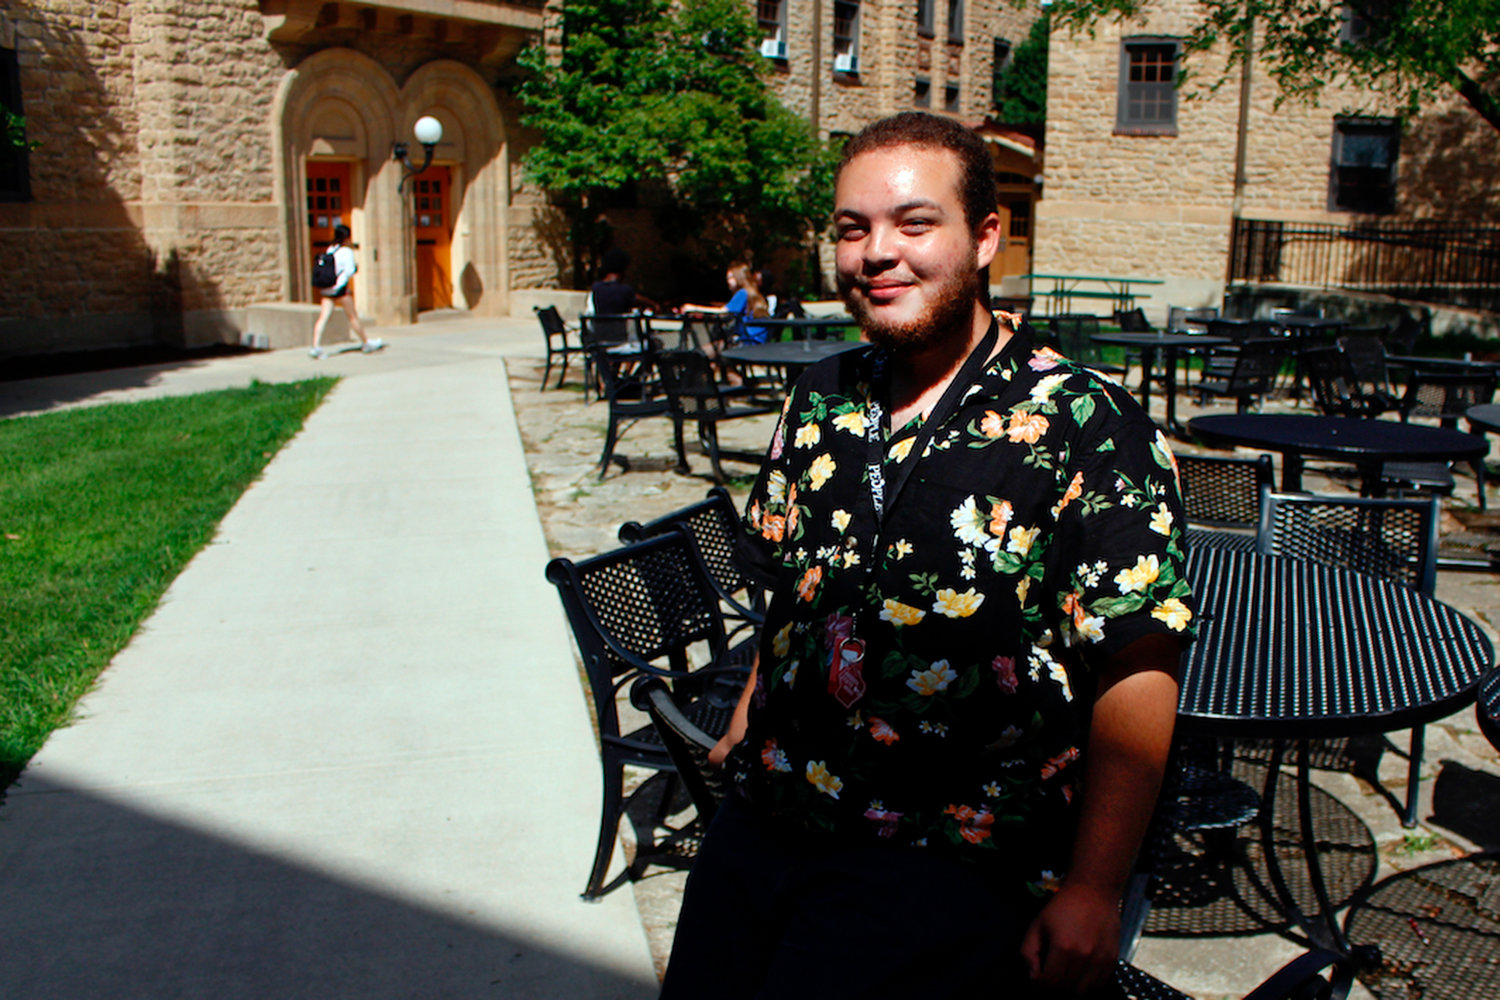 Angel Hope poses at the University of Wisconsin, in Madison, Wis., July 27, 2022. He was there for an intense six-week summer bridge program for students of color and first-generation students at the university. Hundreds of thousands of recent graduates are heading to college this fall after spending more than half their high school careers dealing with the upheaval of a pandemic. Hope says he didn't feel ready for college after online classes in high school caused him to fall behind but says the bridge classes made him feel more confident. (AP Photo/Carrie Antlfinger)